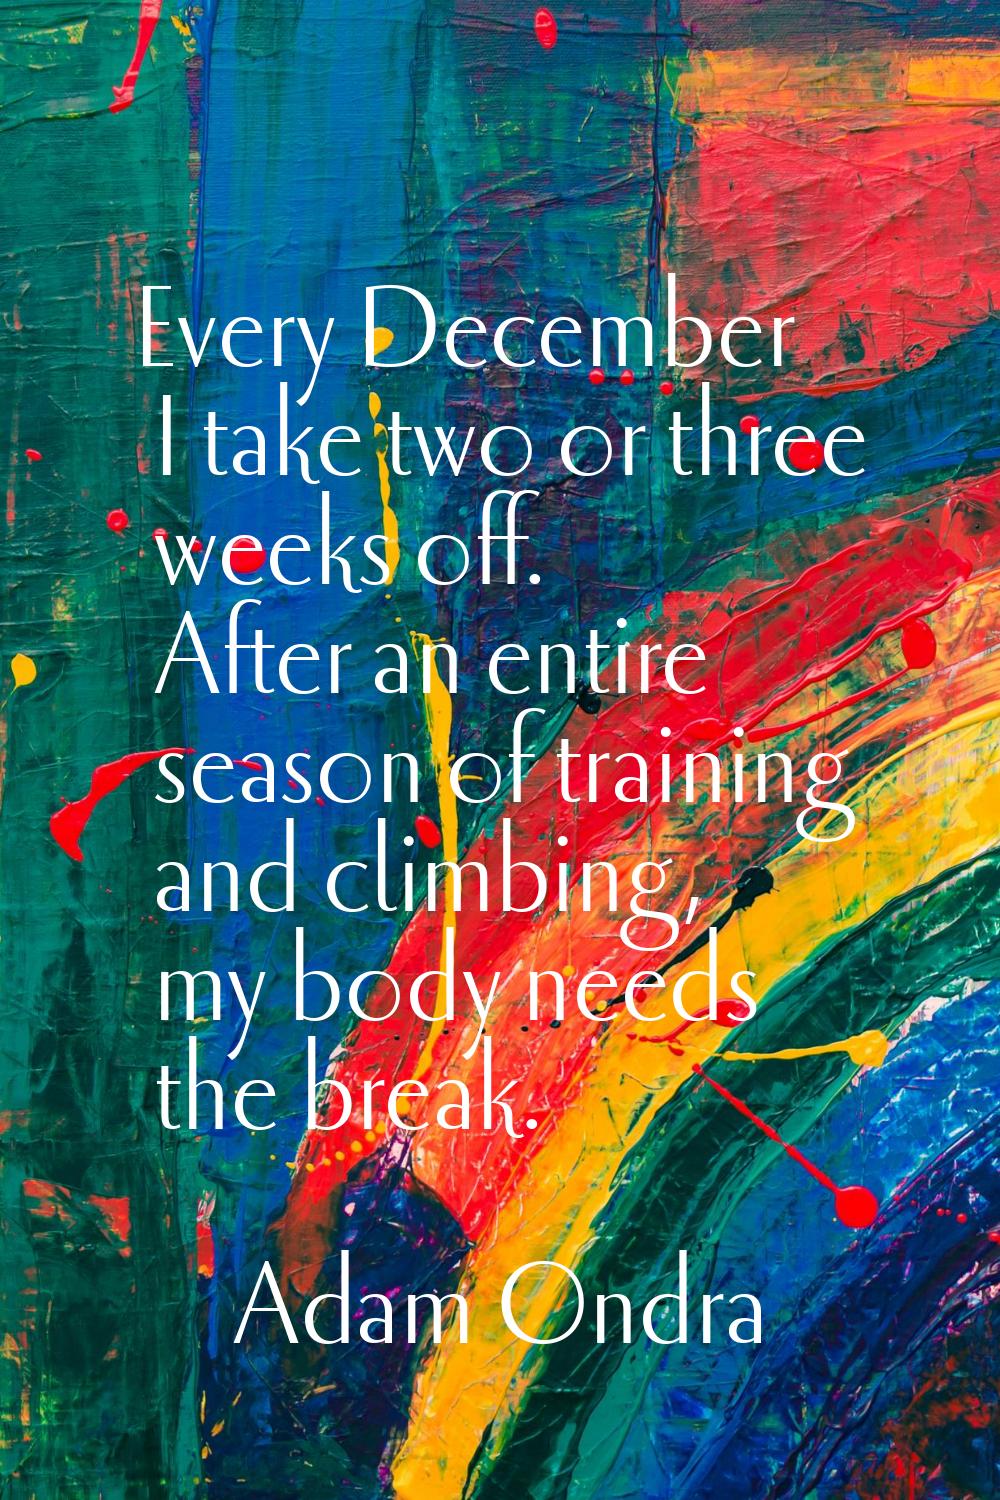 Every December I take two or three weeks off. After an entire season of training and climbing, my b